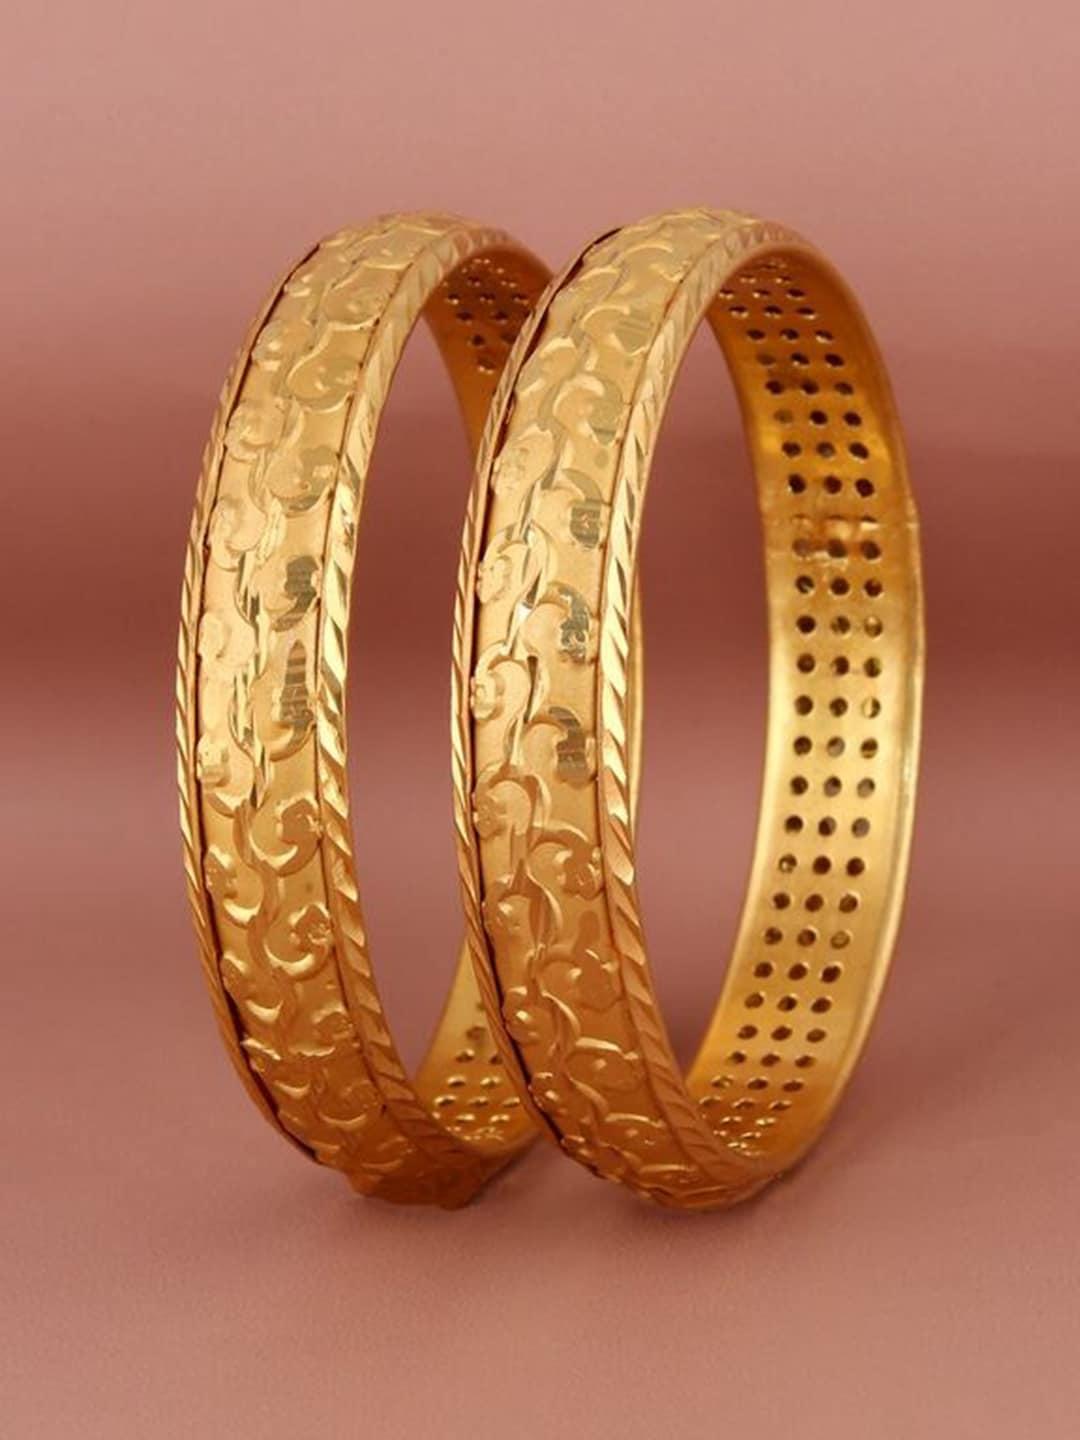 lucky jewellery set of 2 18k gold-plated bangles